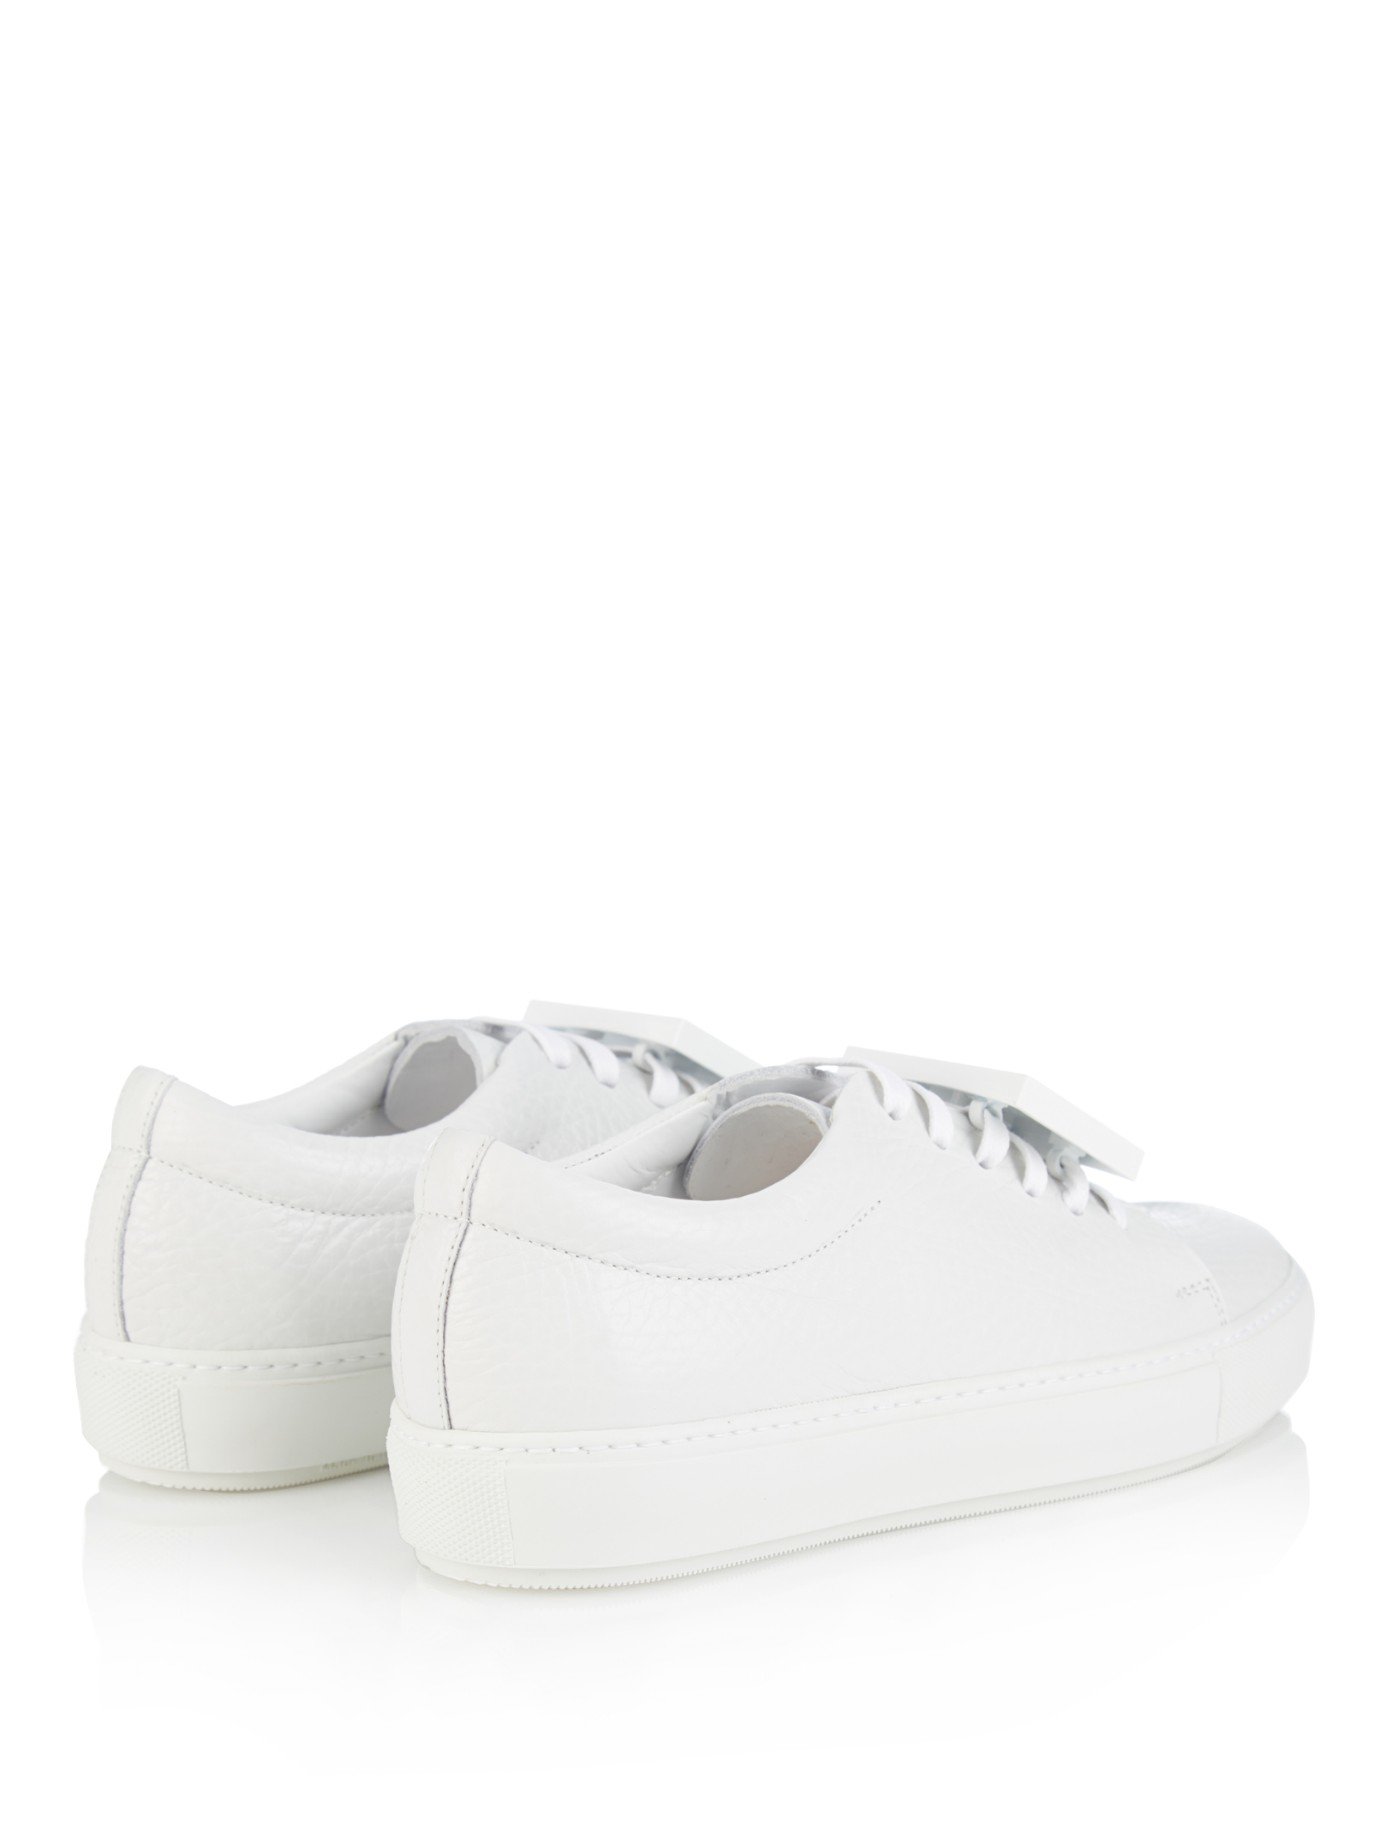 Acne Studios Adriana Smiley-Face Grained-Leather Sneakers in White - Lyst